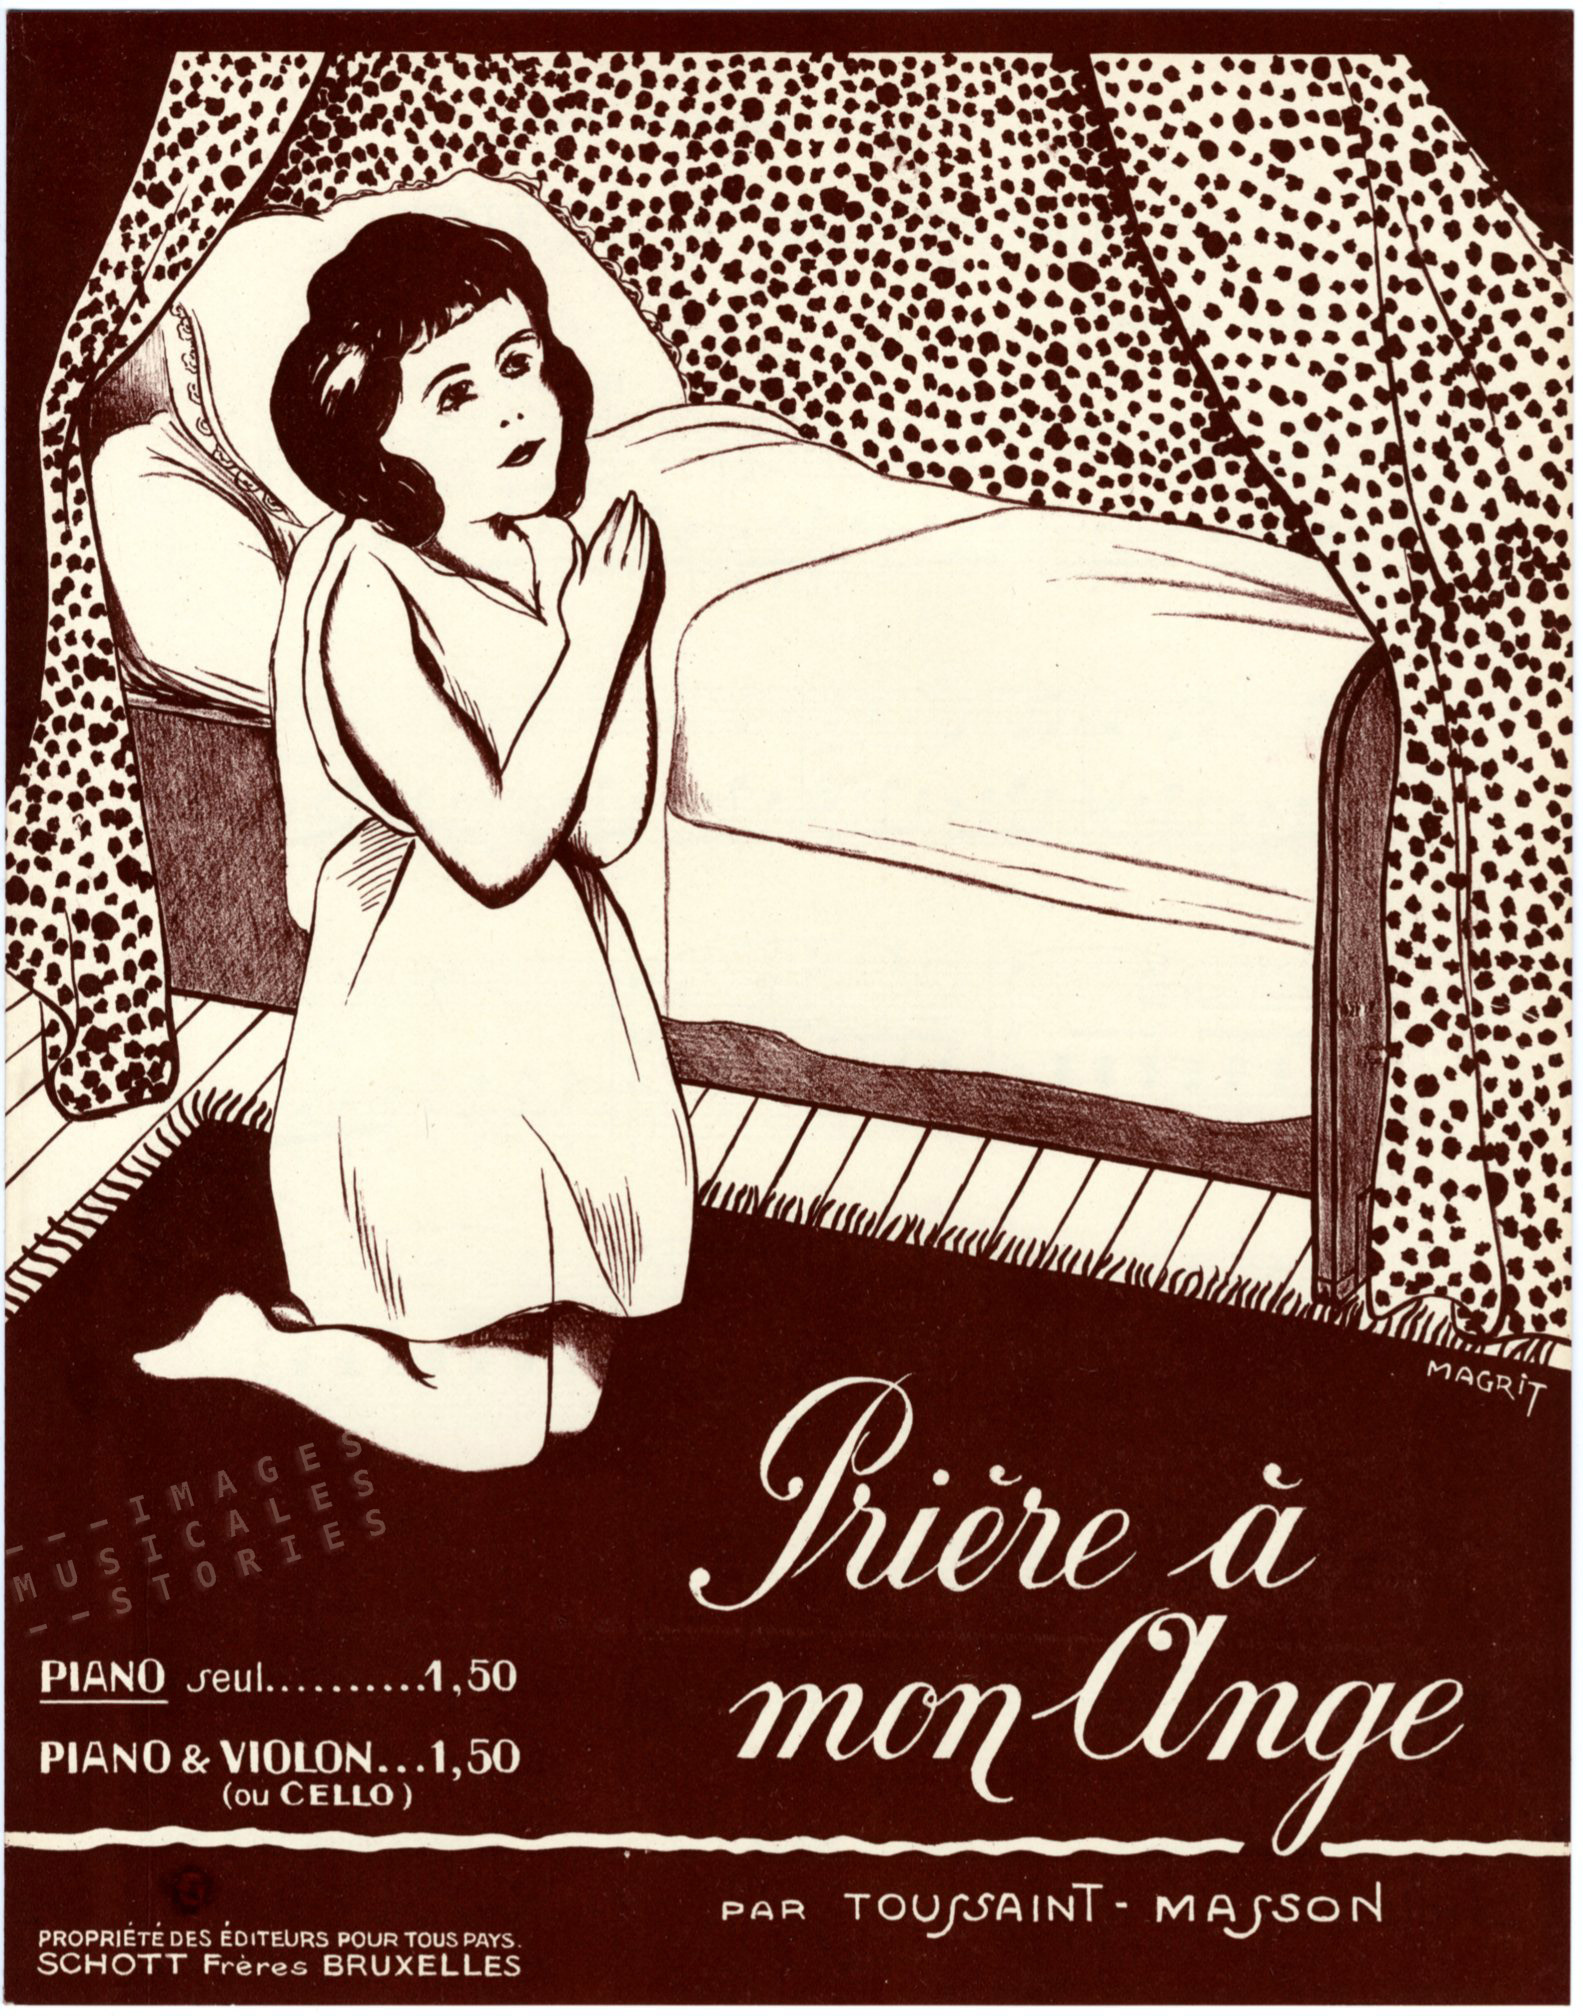 Sheet music cover illustrated by RenÃ© Magritte: 'PriÃ¨re Ã  mon ante' by Toussain Masson (1924)